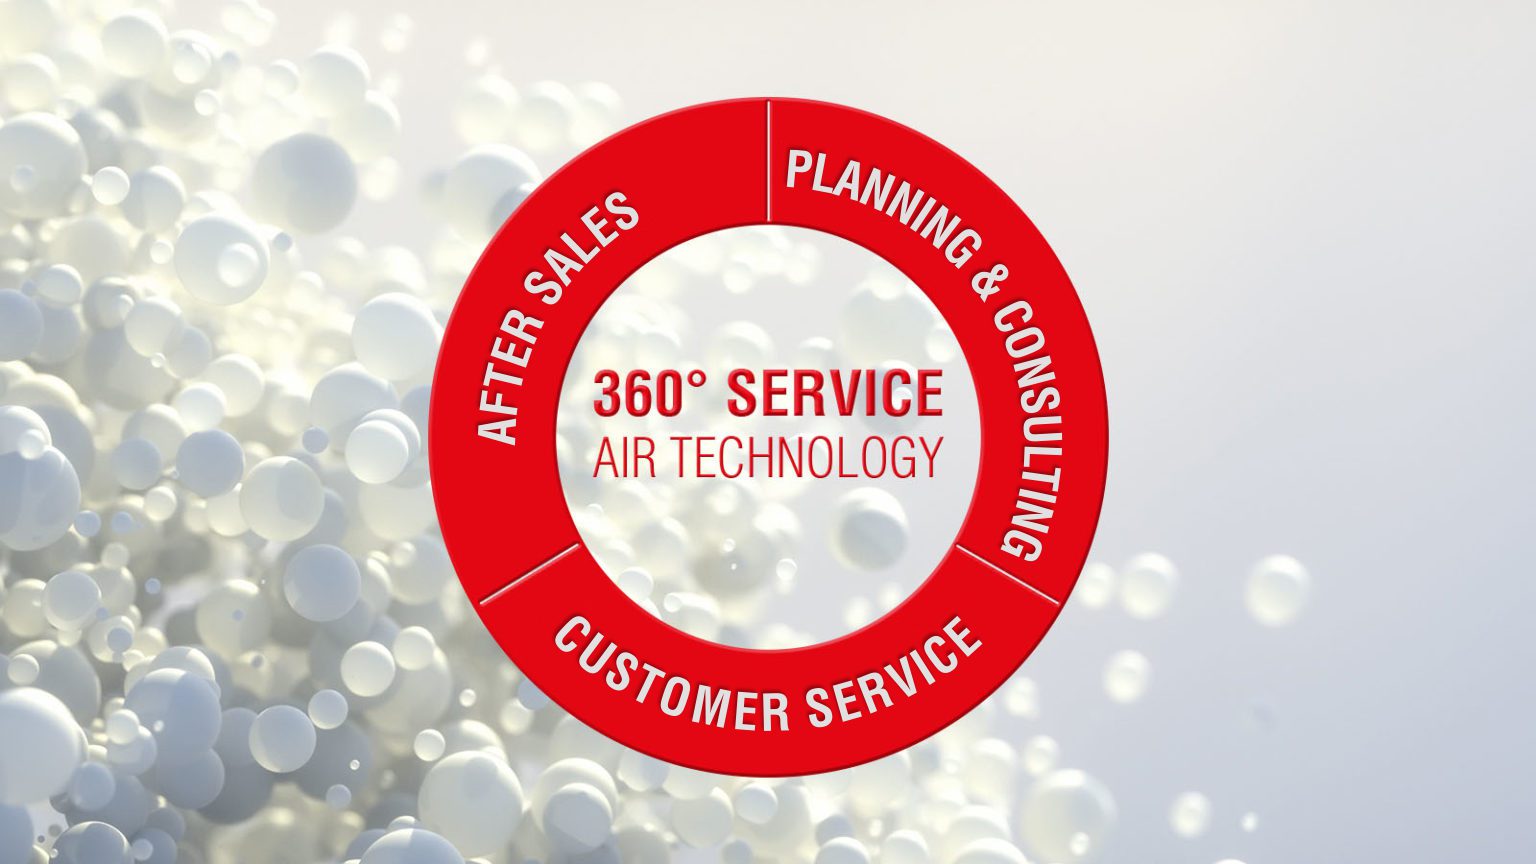 Our 360° service